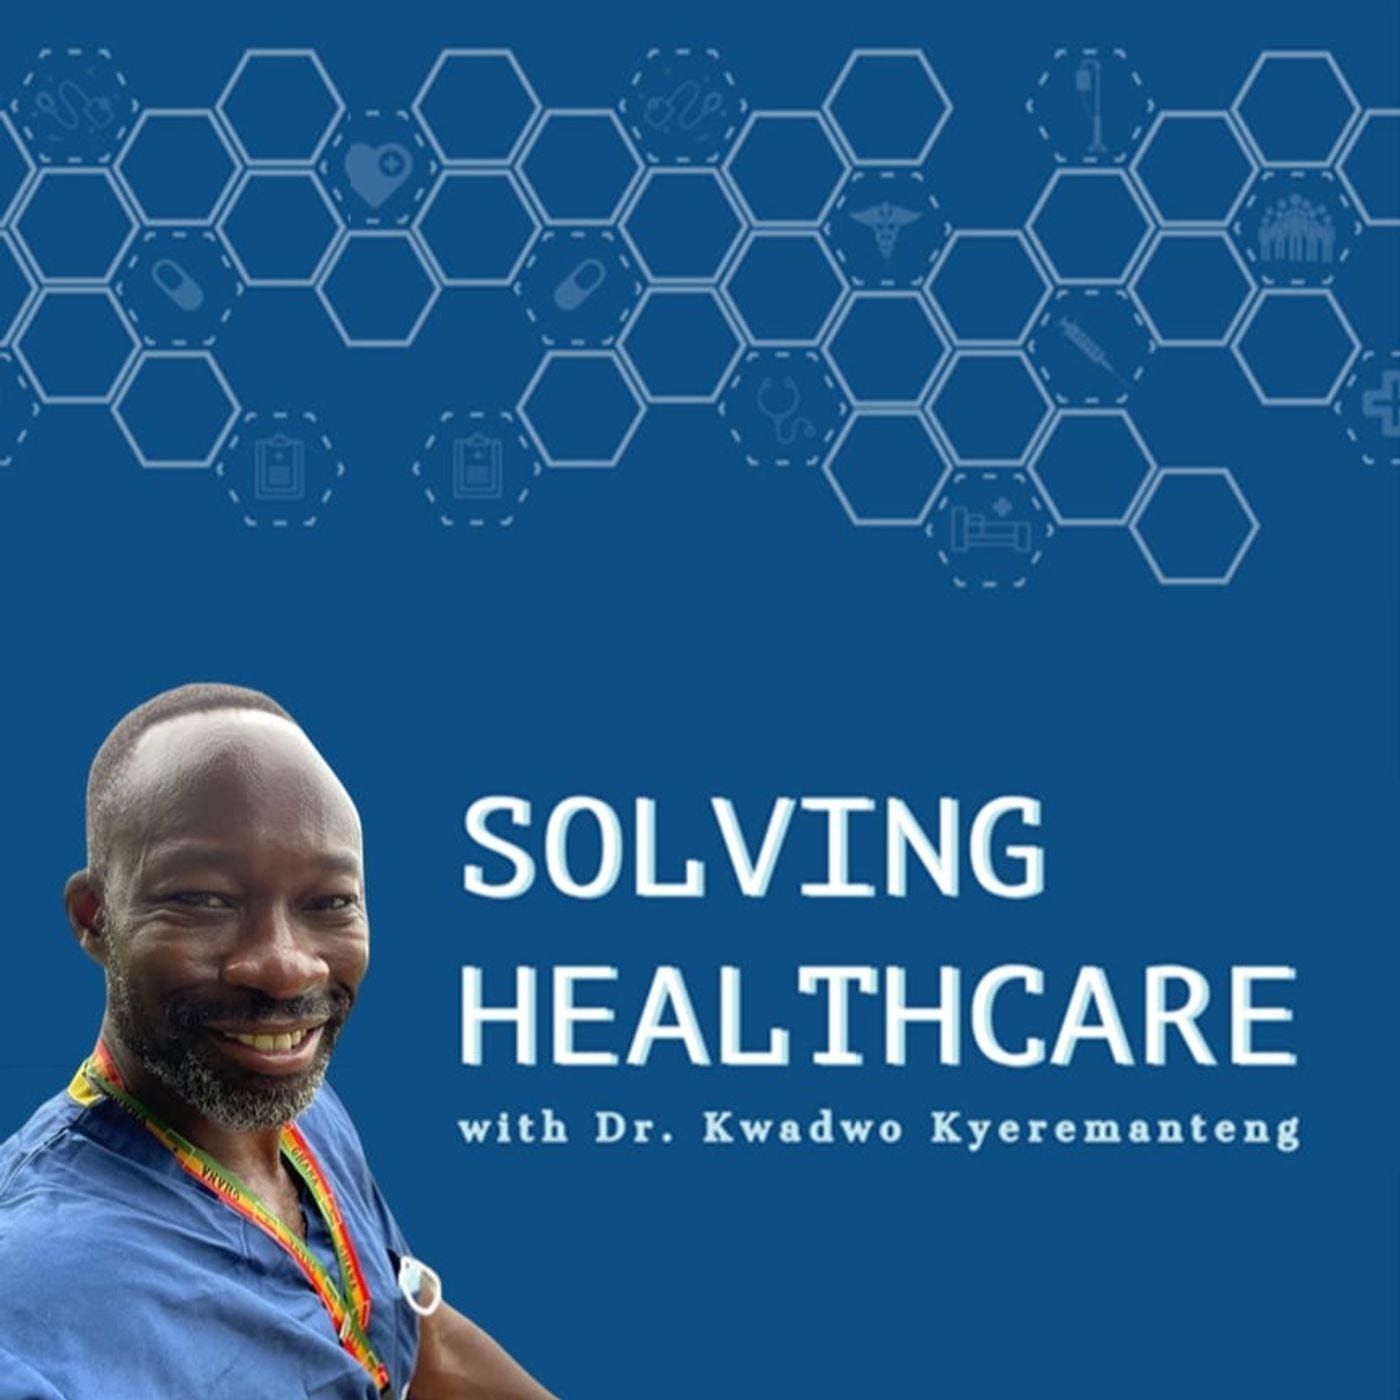 Solving Healthcare Through Integrative Thinking, with Roger Martin